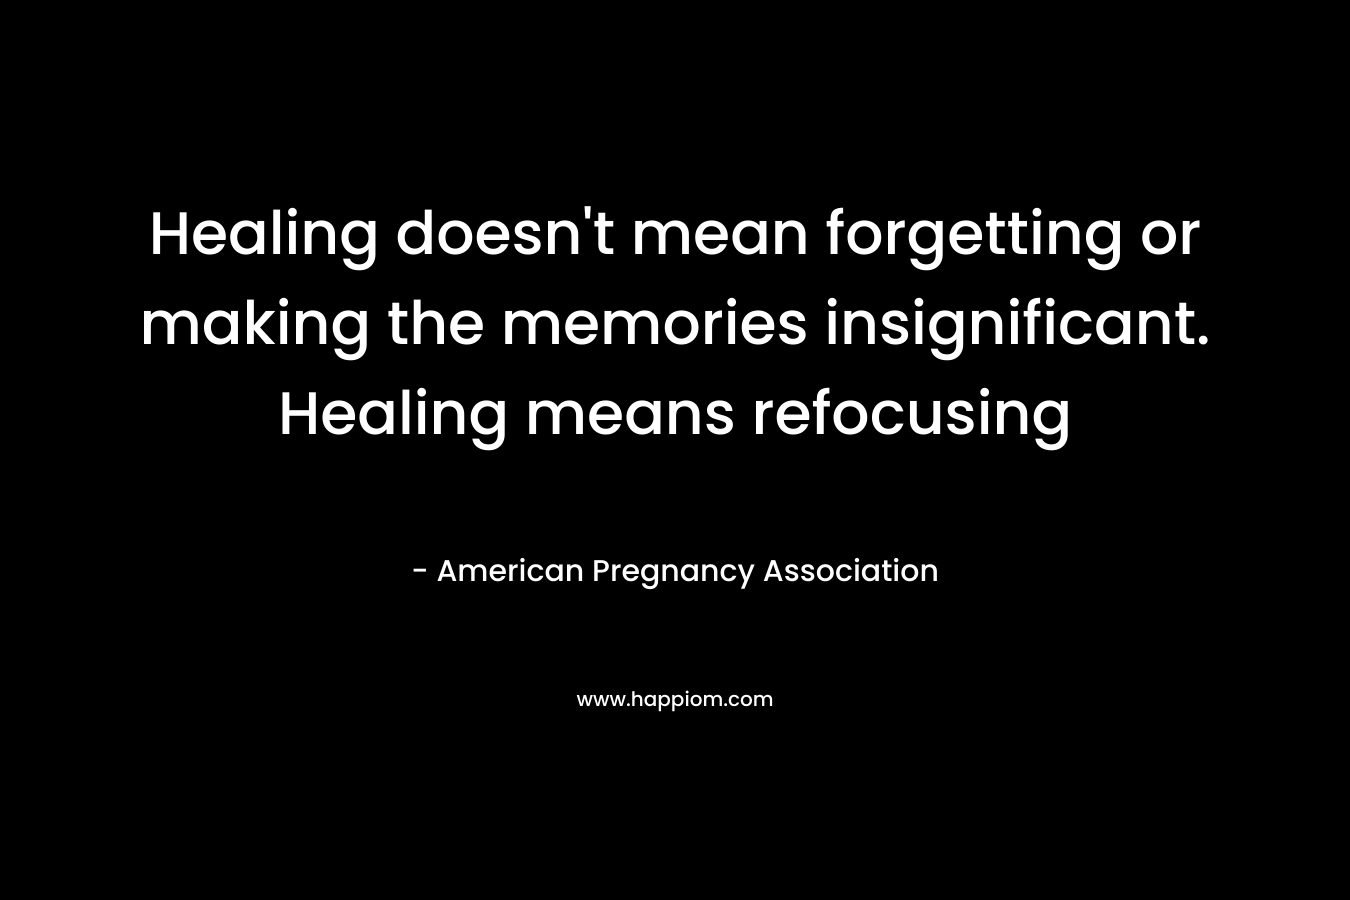 Healing doesn’t mean forgetting or making the memories insignificant. Healing means refocusing – American Pregnancy Association